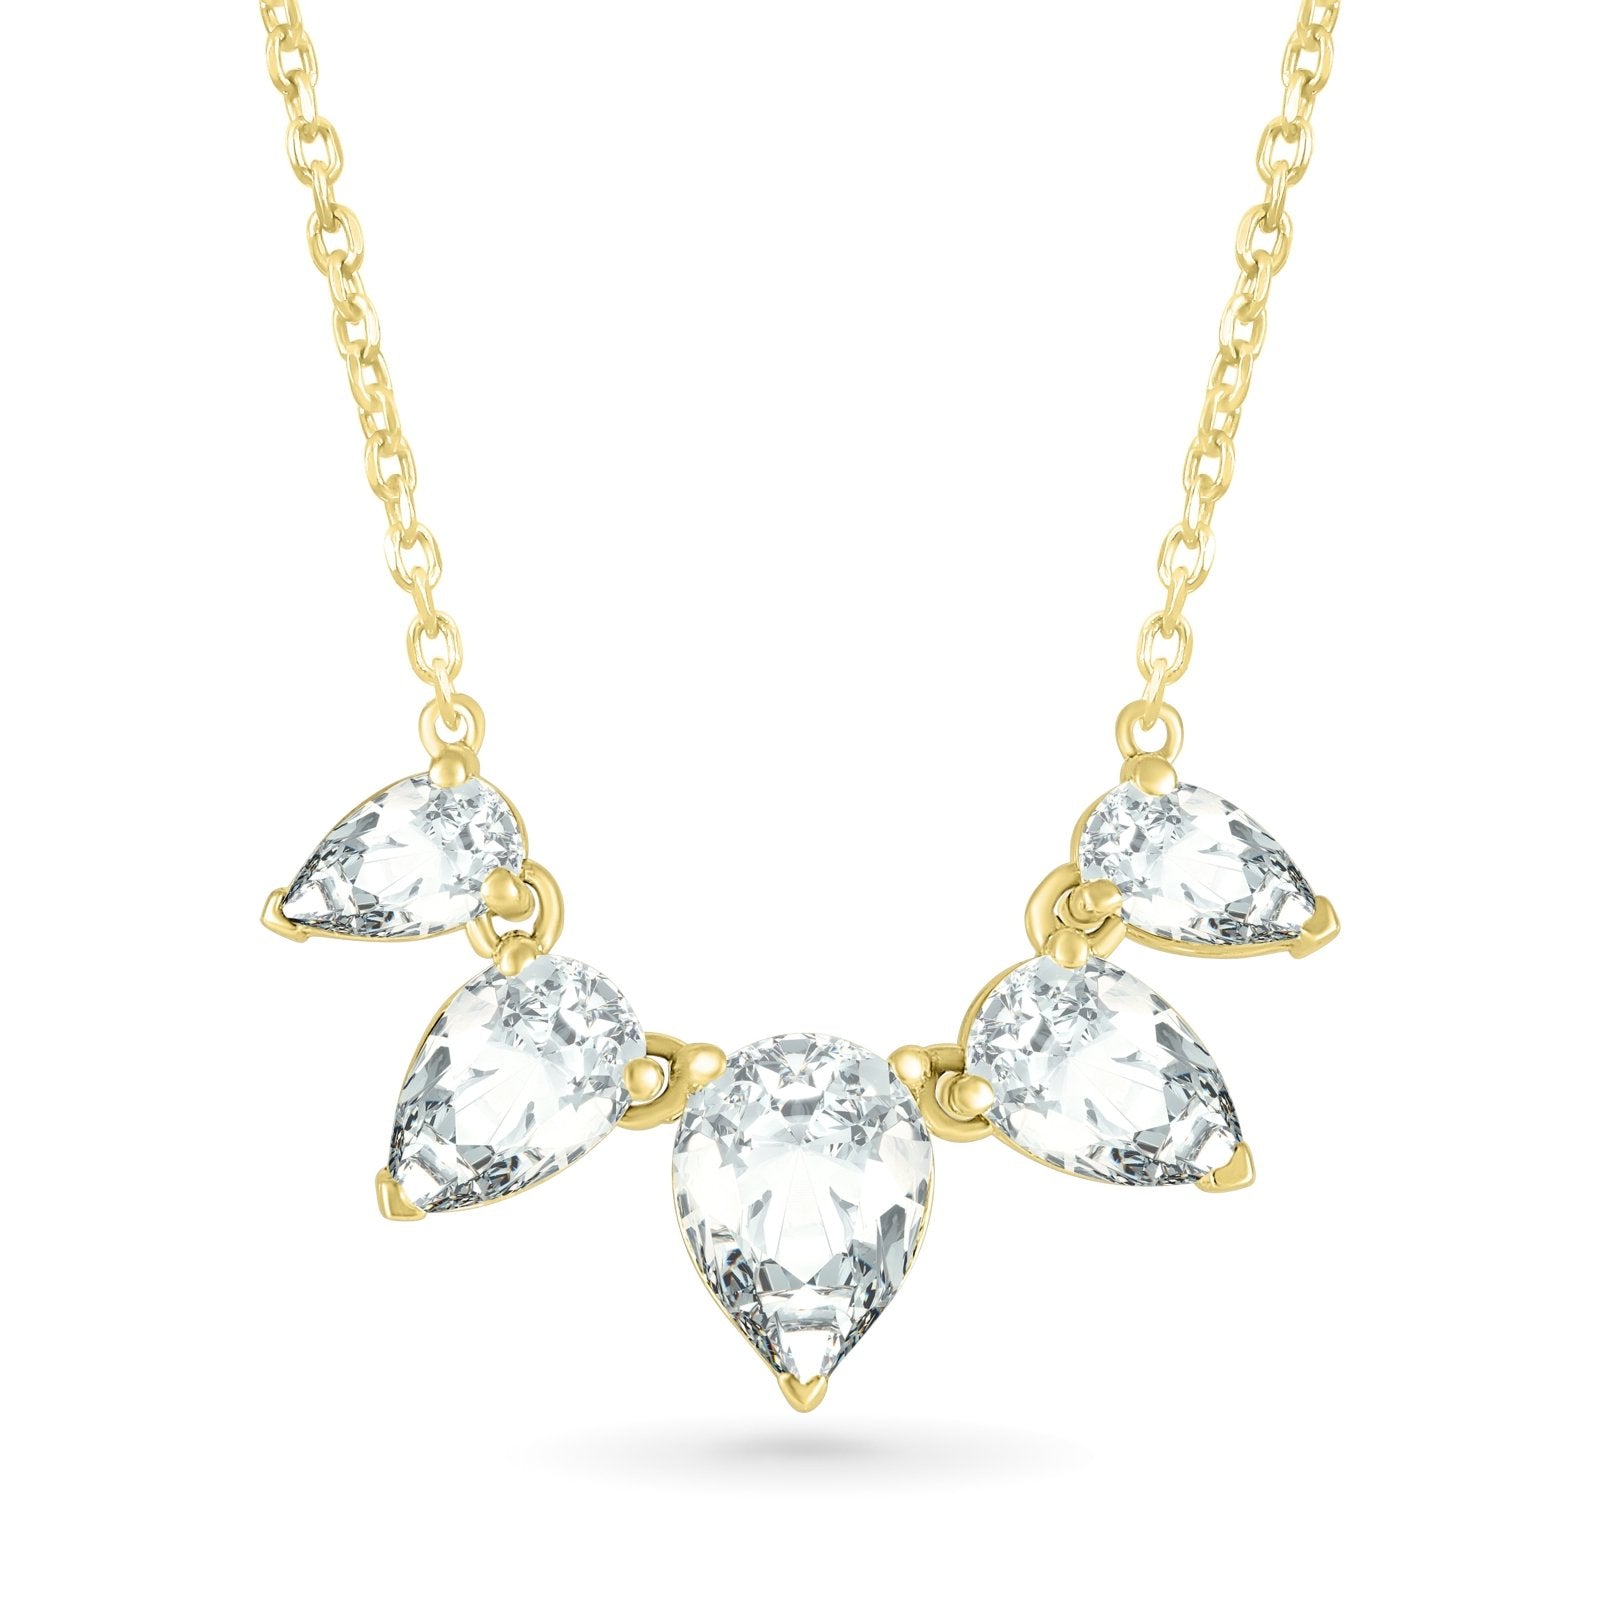 Teardrop Shaped White Sapphire Necklace Necklaces Estella Collection 32711 Made to Order White Sapphire Yellow Gold #tag4# #tag5# #tag6# #tag7# #tag8# #tag9# #tag10#